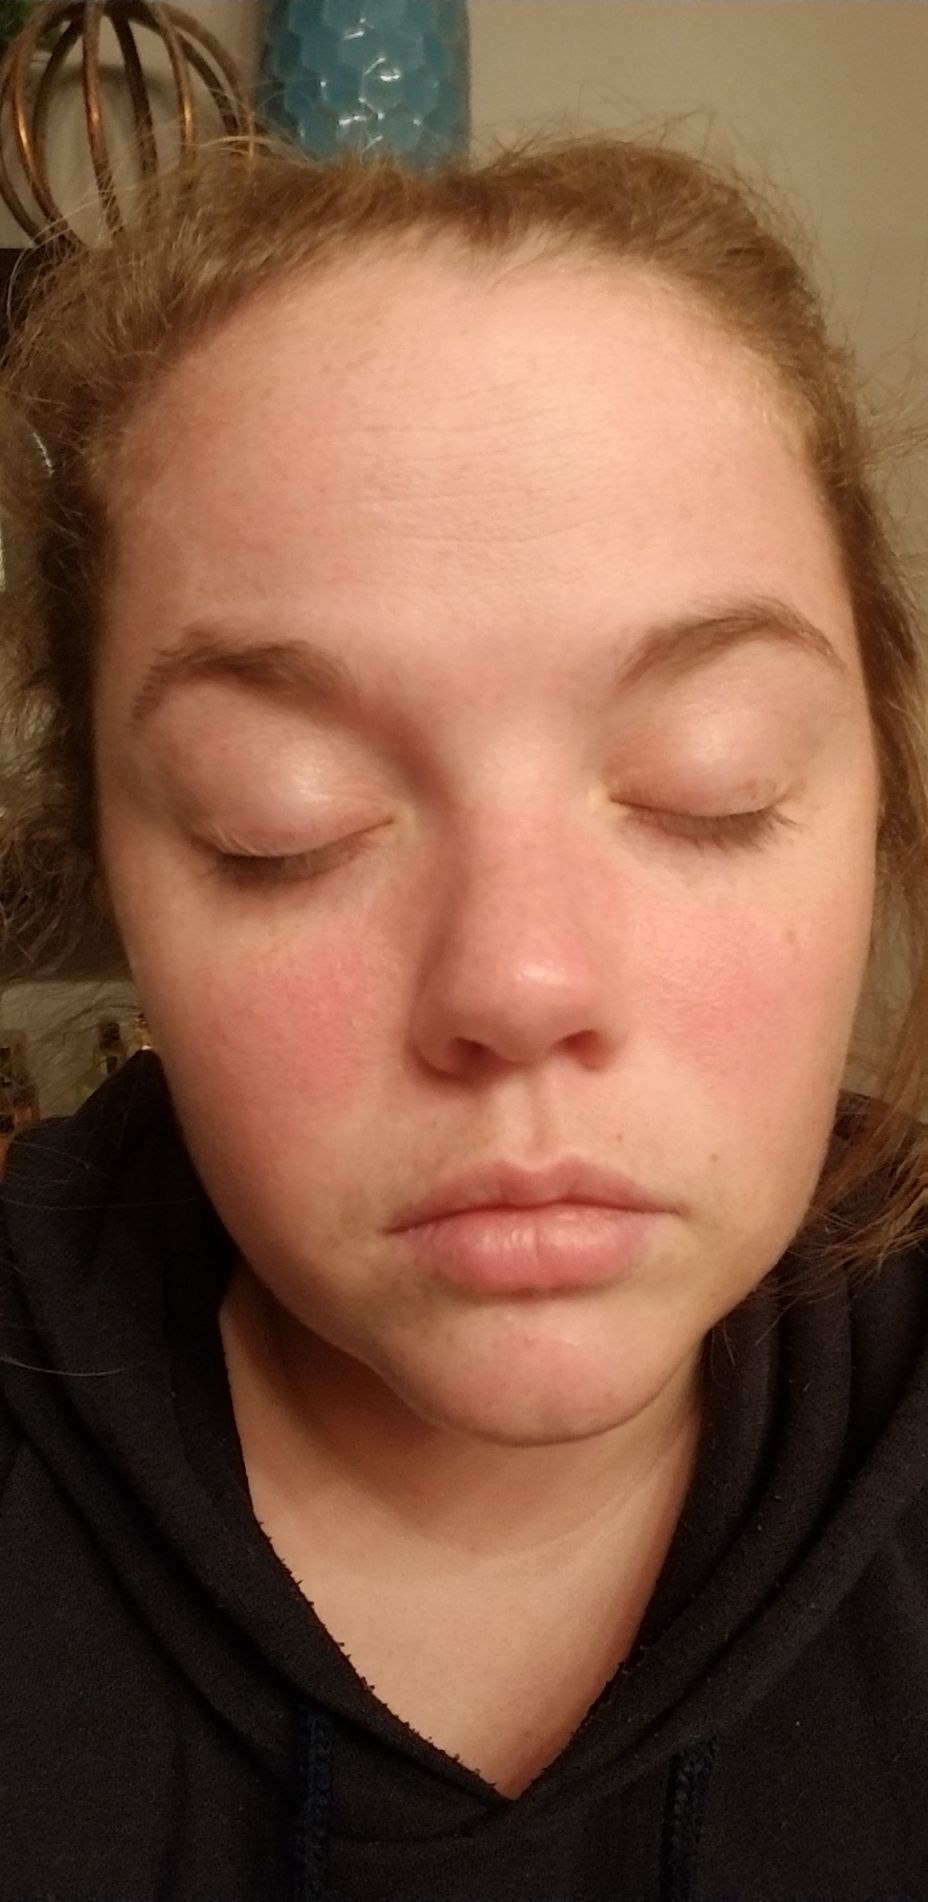 <p>does anyone have a rash like this? I'm undiagnosed and frustrated that it's right on my face...</p>